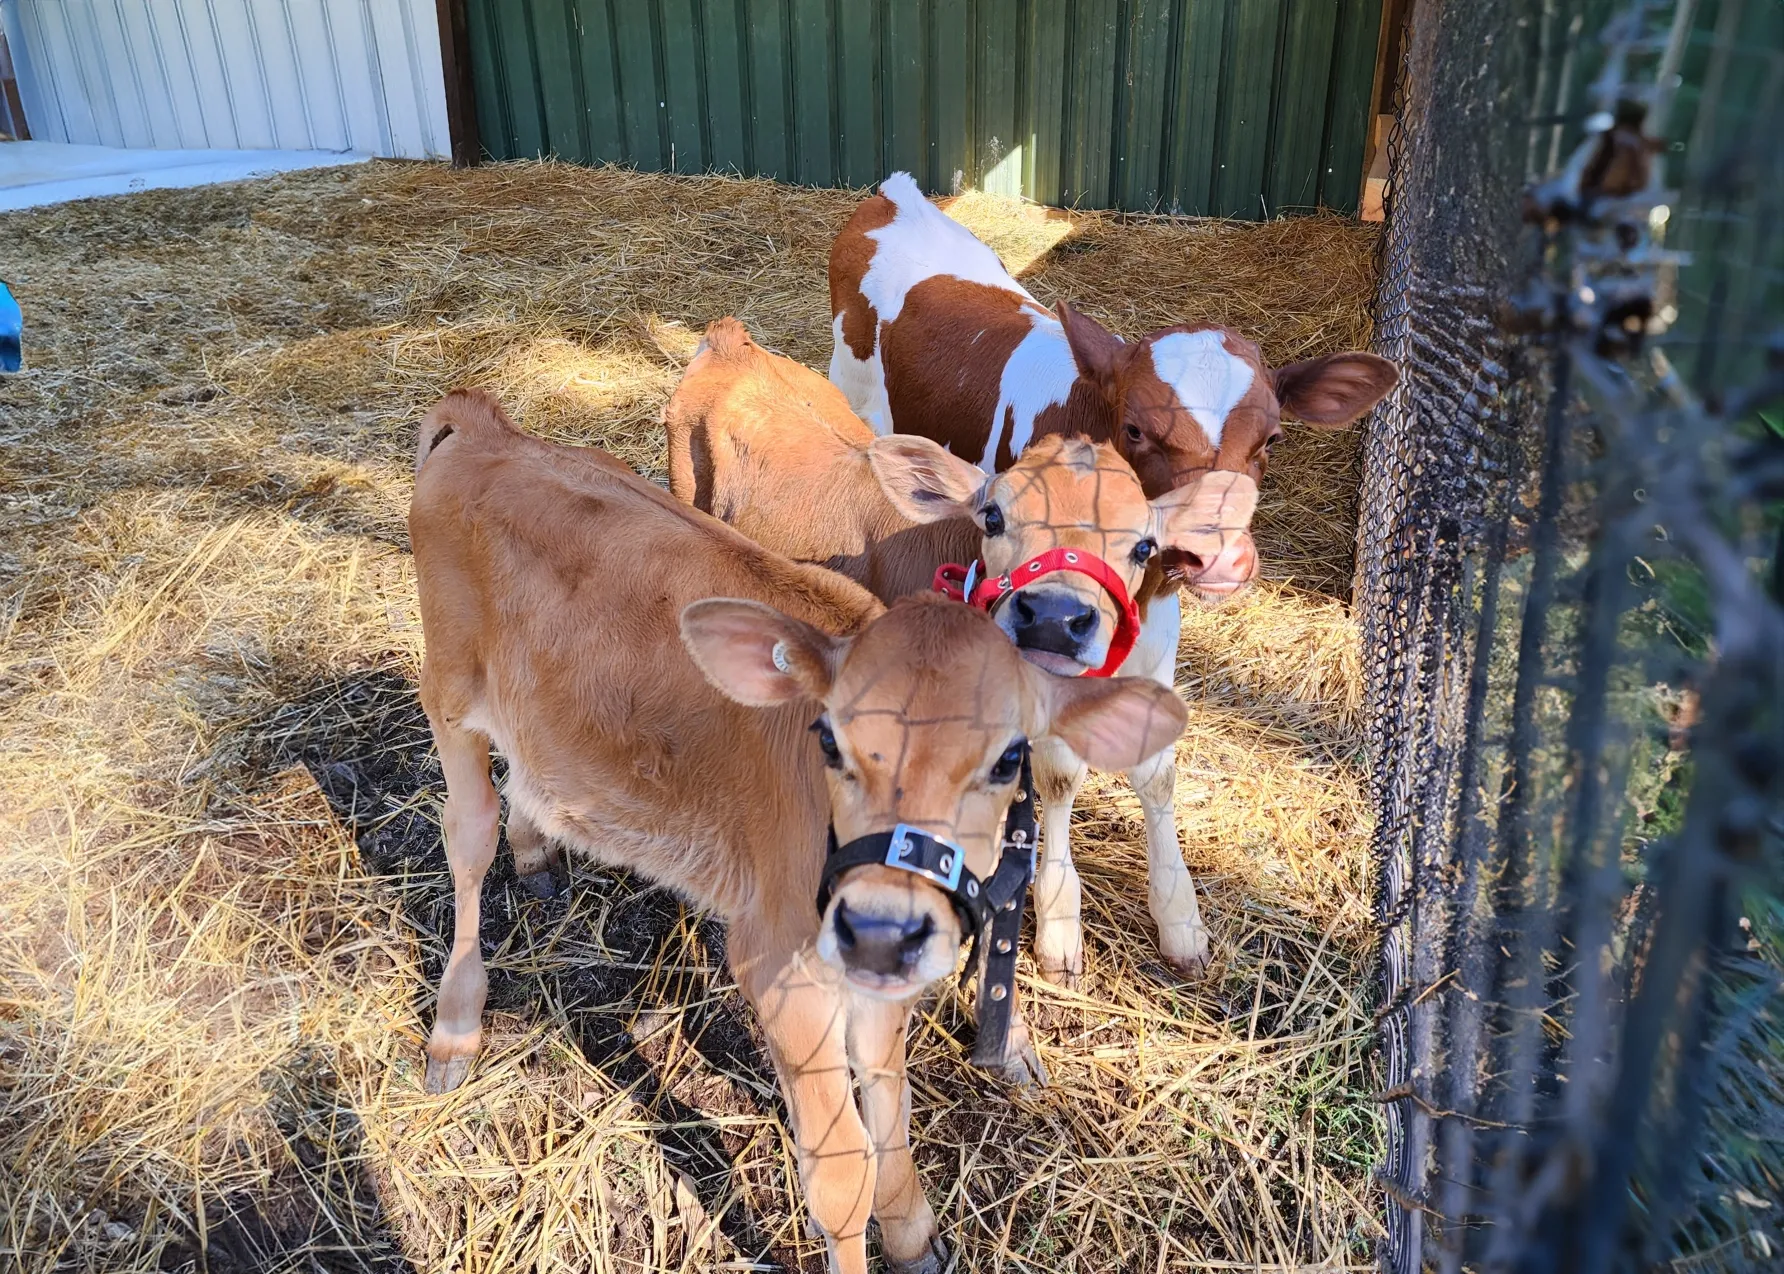 Image of three calves named Steve, Patch and Joe